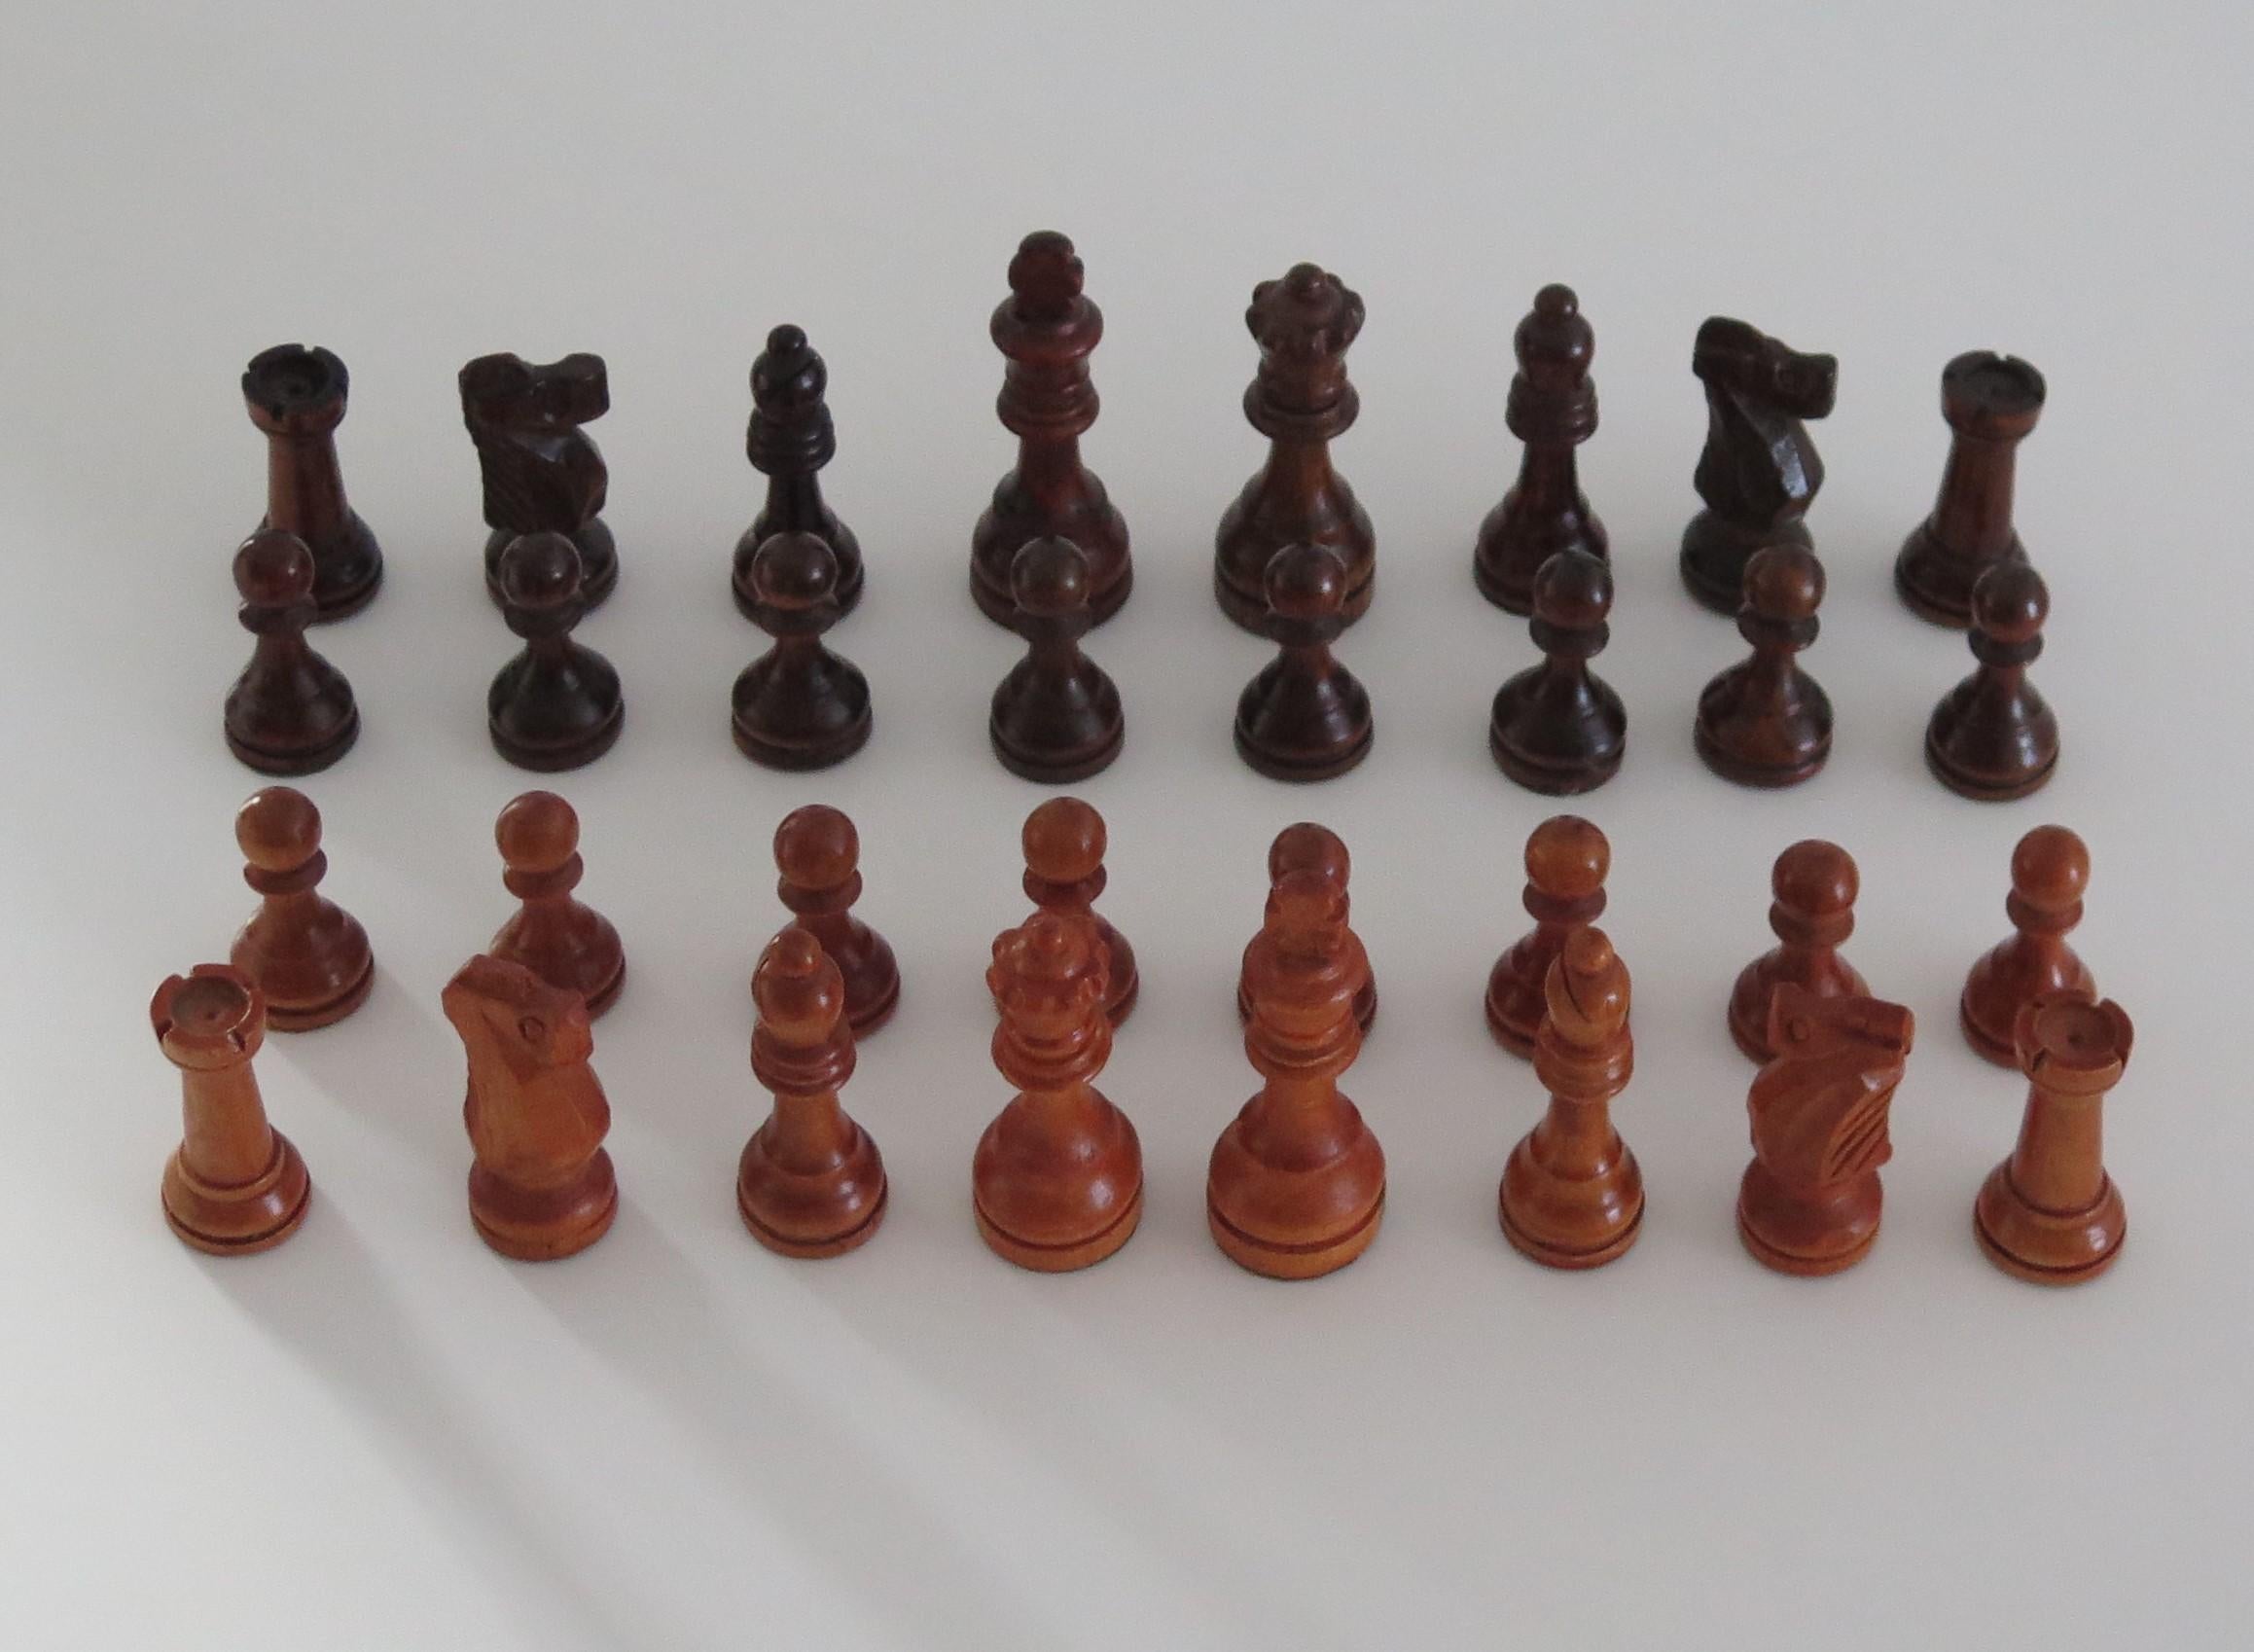 jaques chess board